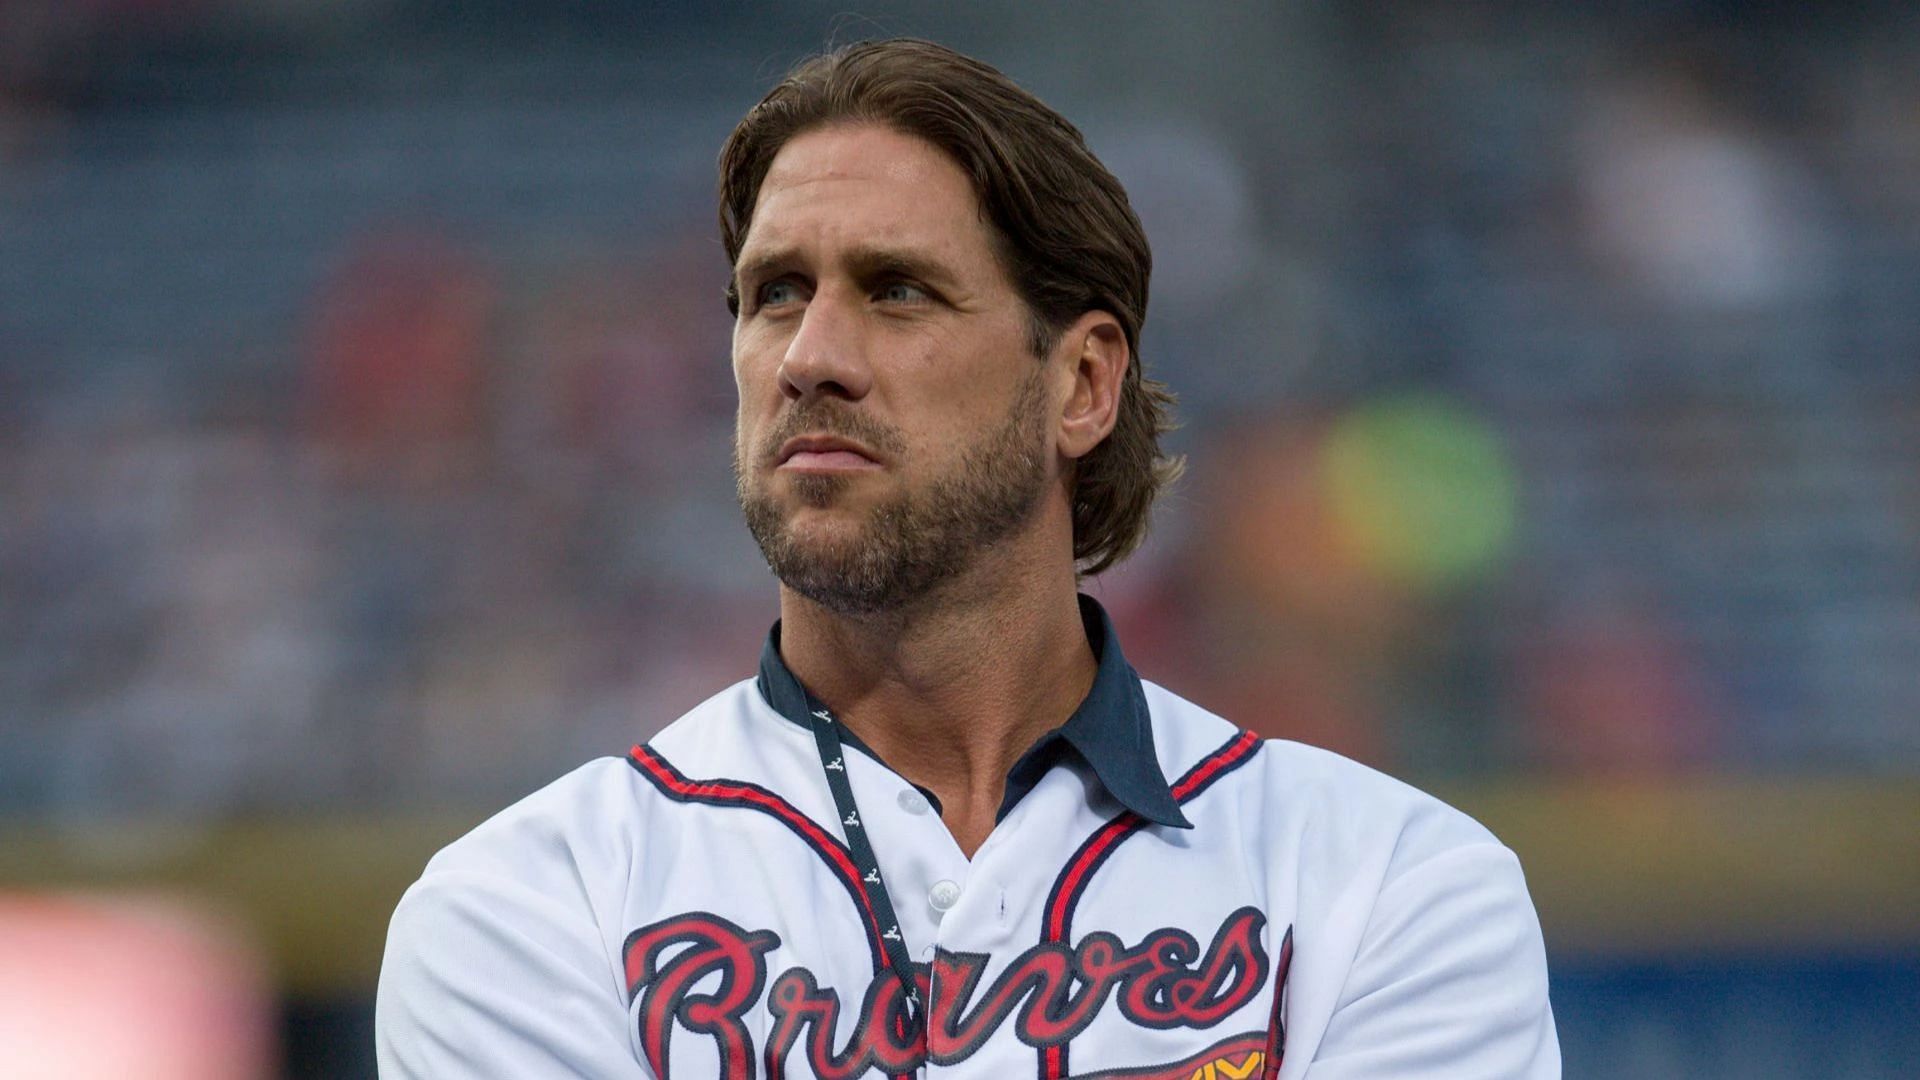 Former Braves player John Rocker participates in a pre-game ceremony honoring many Braves alumni players prior the game against the Washington Nationals at Turner Field on August 8, 2014 in Atlanta, Georgia. (Photo by Kevin Liles/Getty Images)